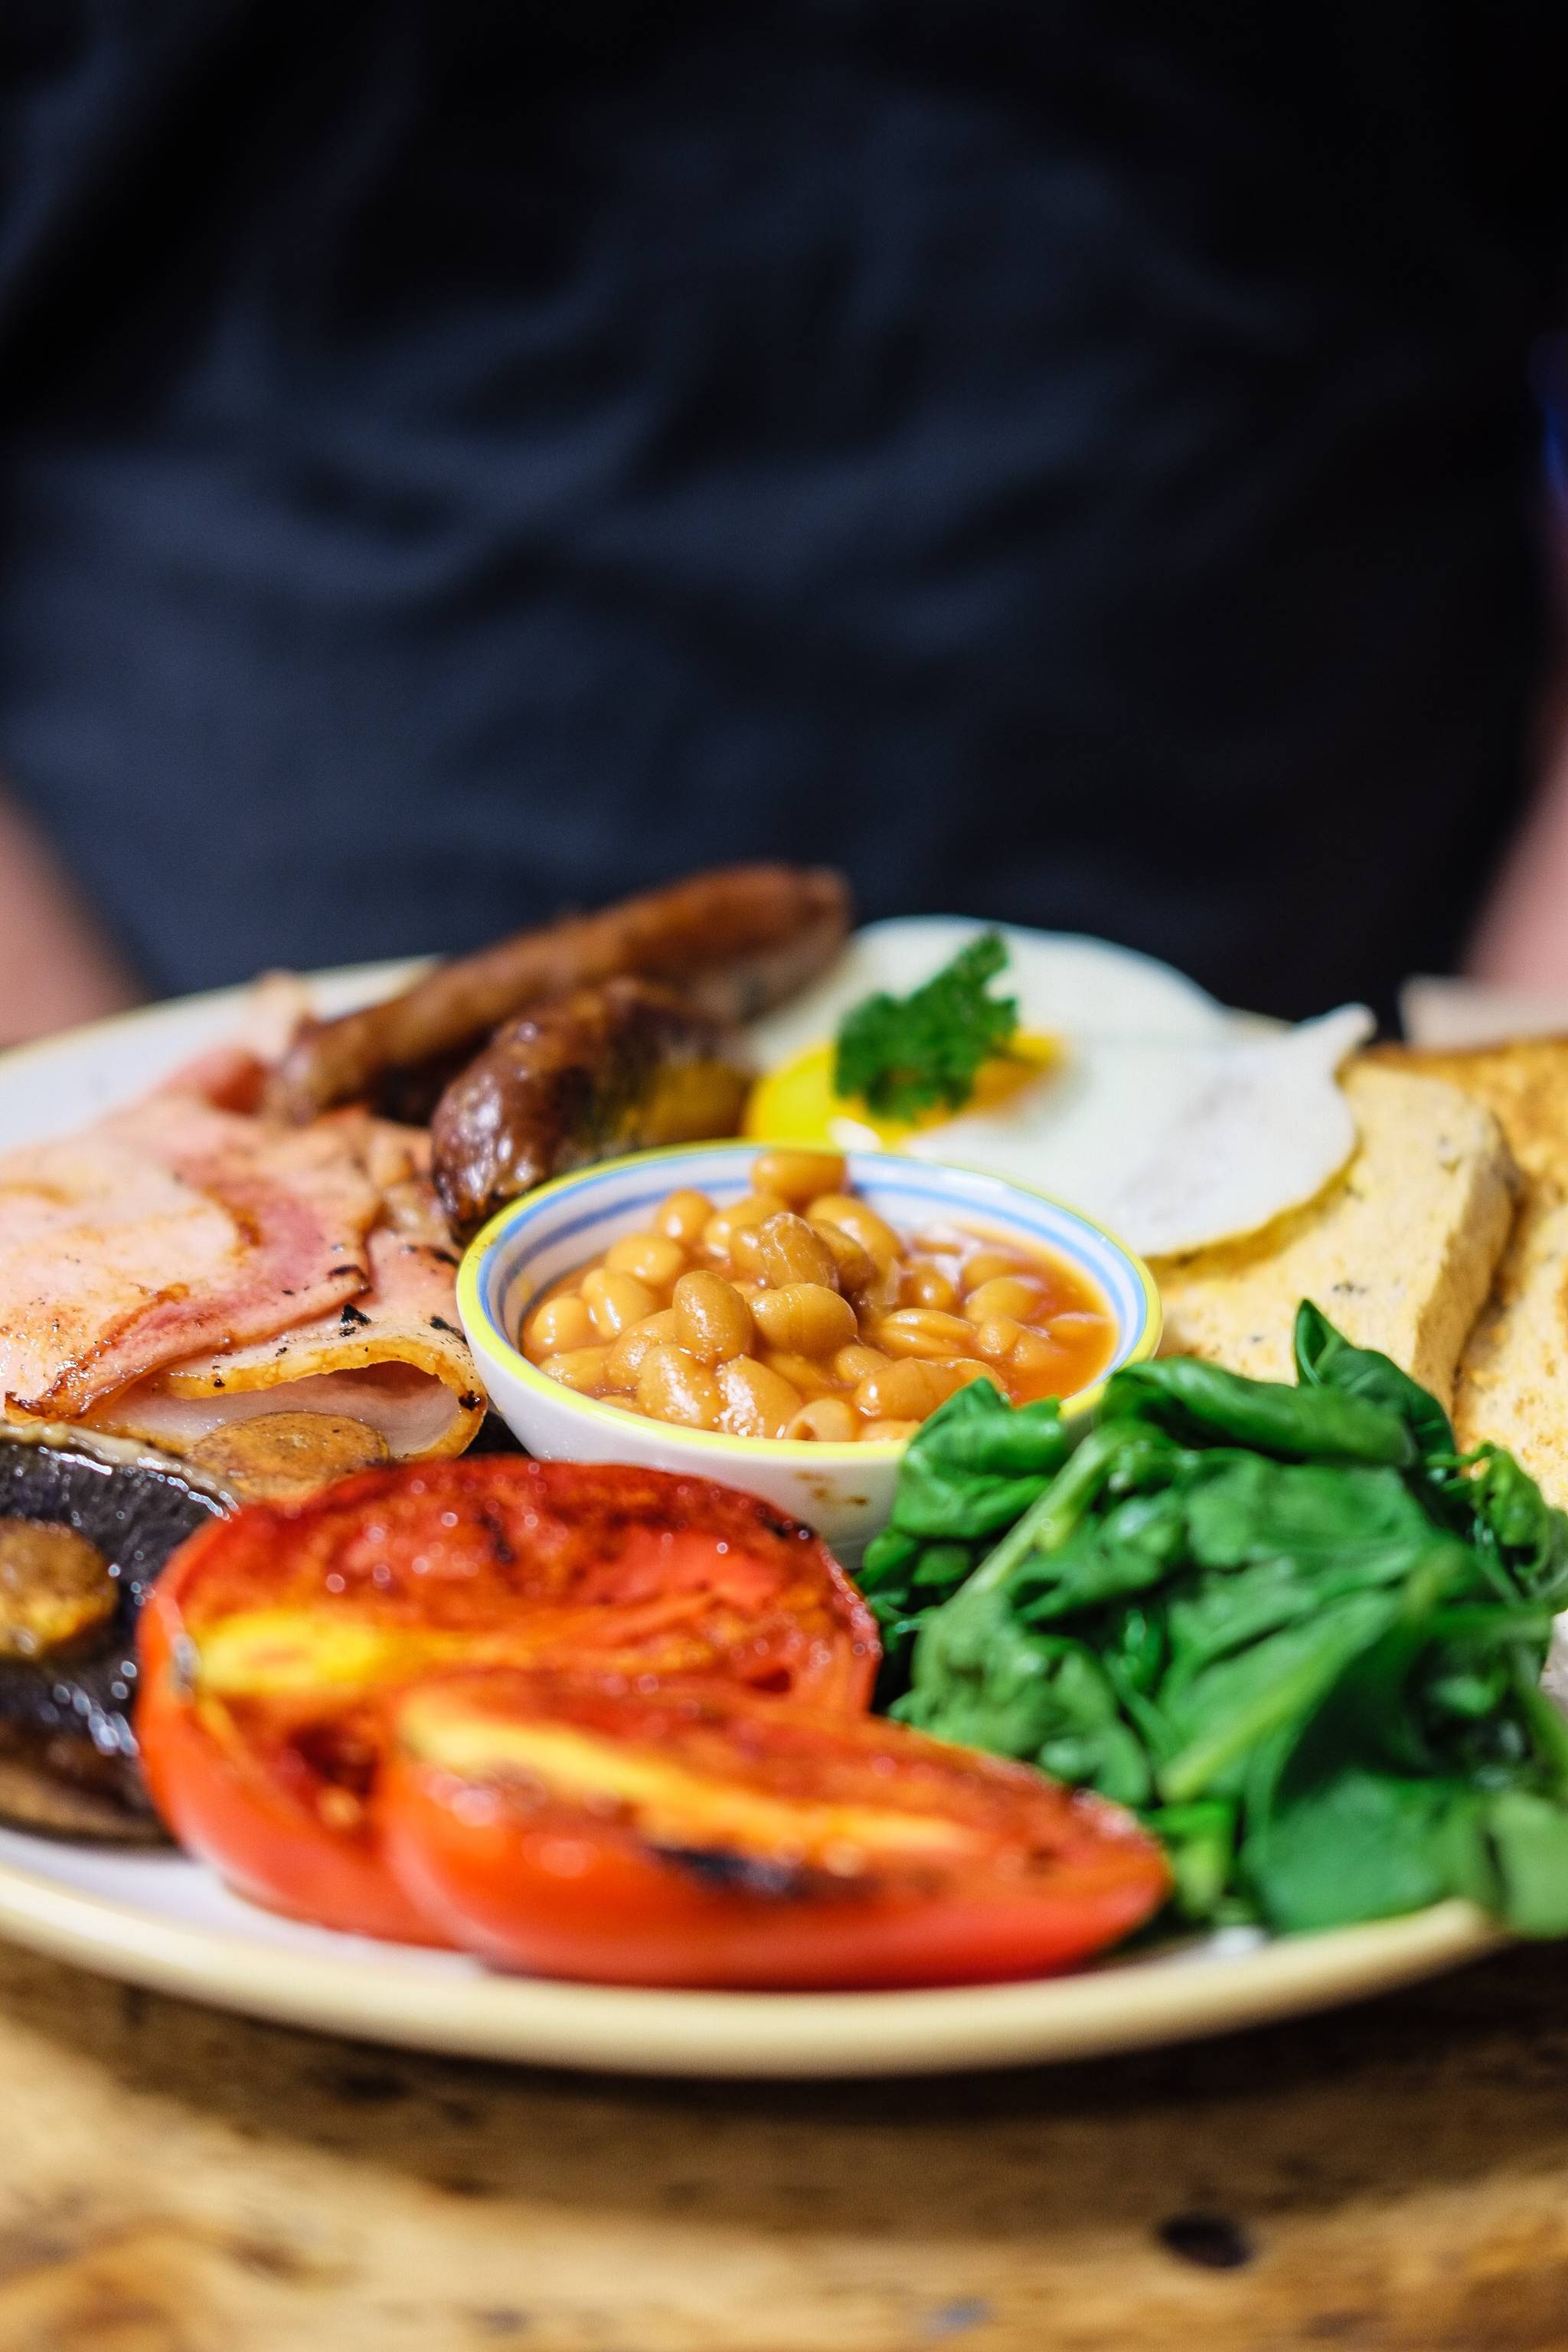 Britons are open to trying more unusual breakfasts